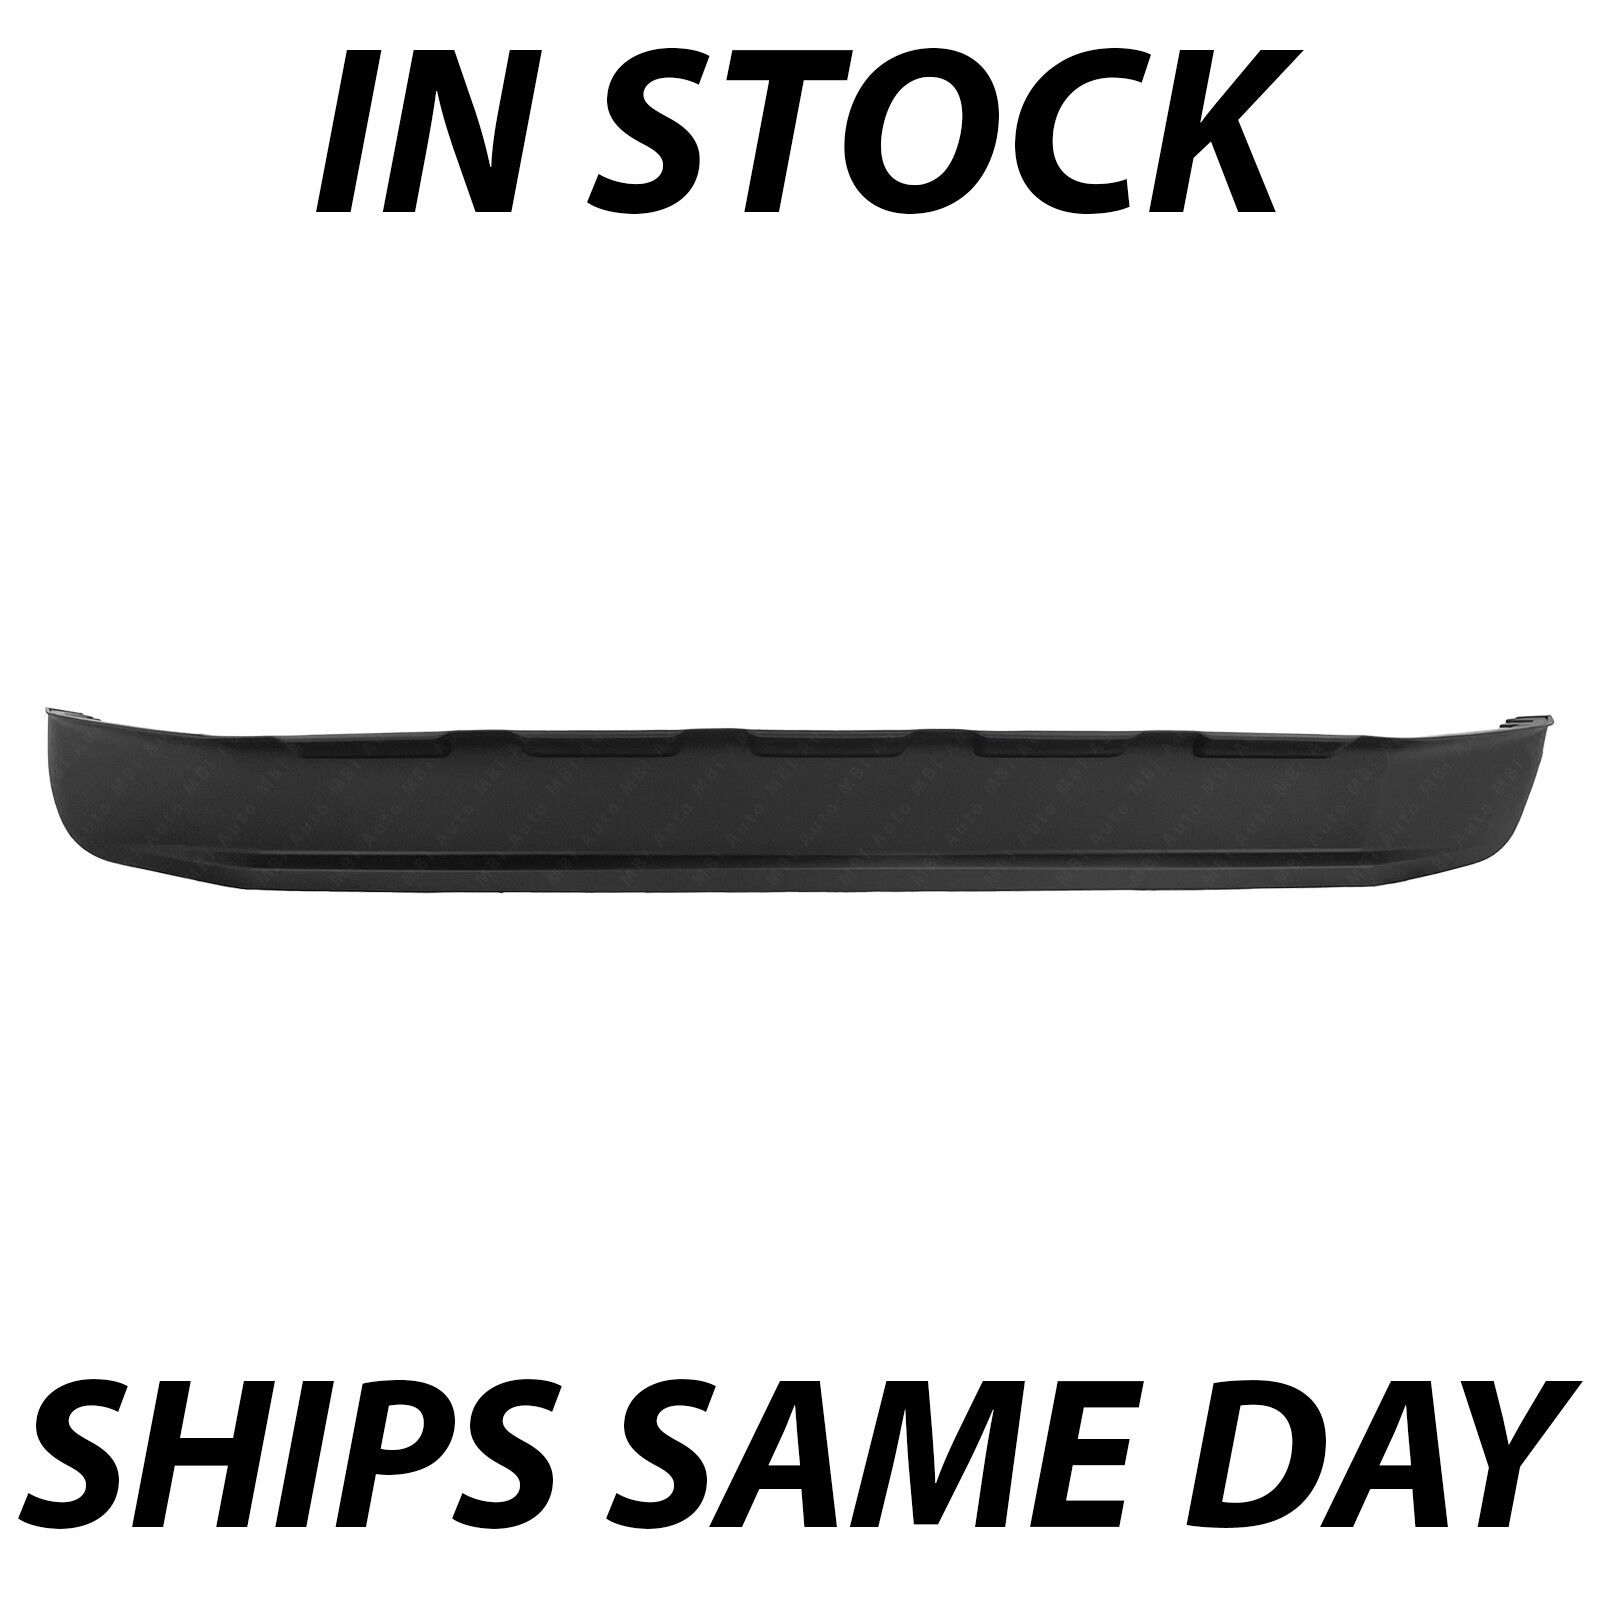 NEW - Bumper Lower Valance Deflector for 2011-2016 Ford F250 F350 Super Duty 4X4